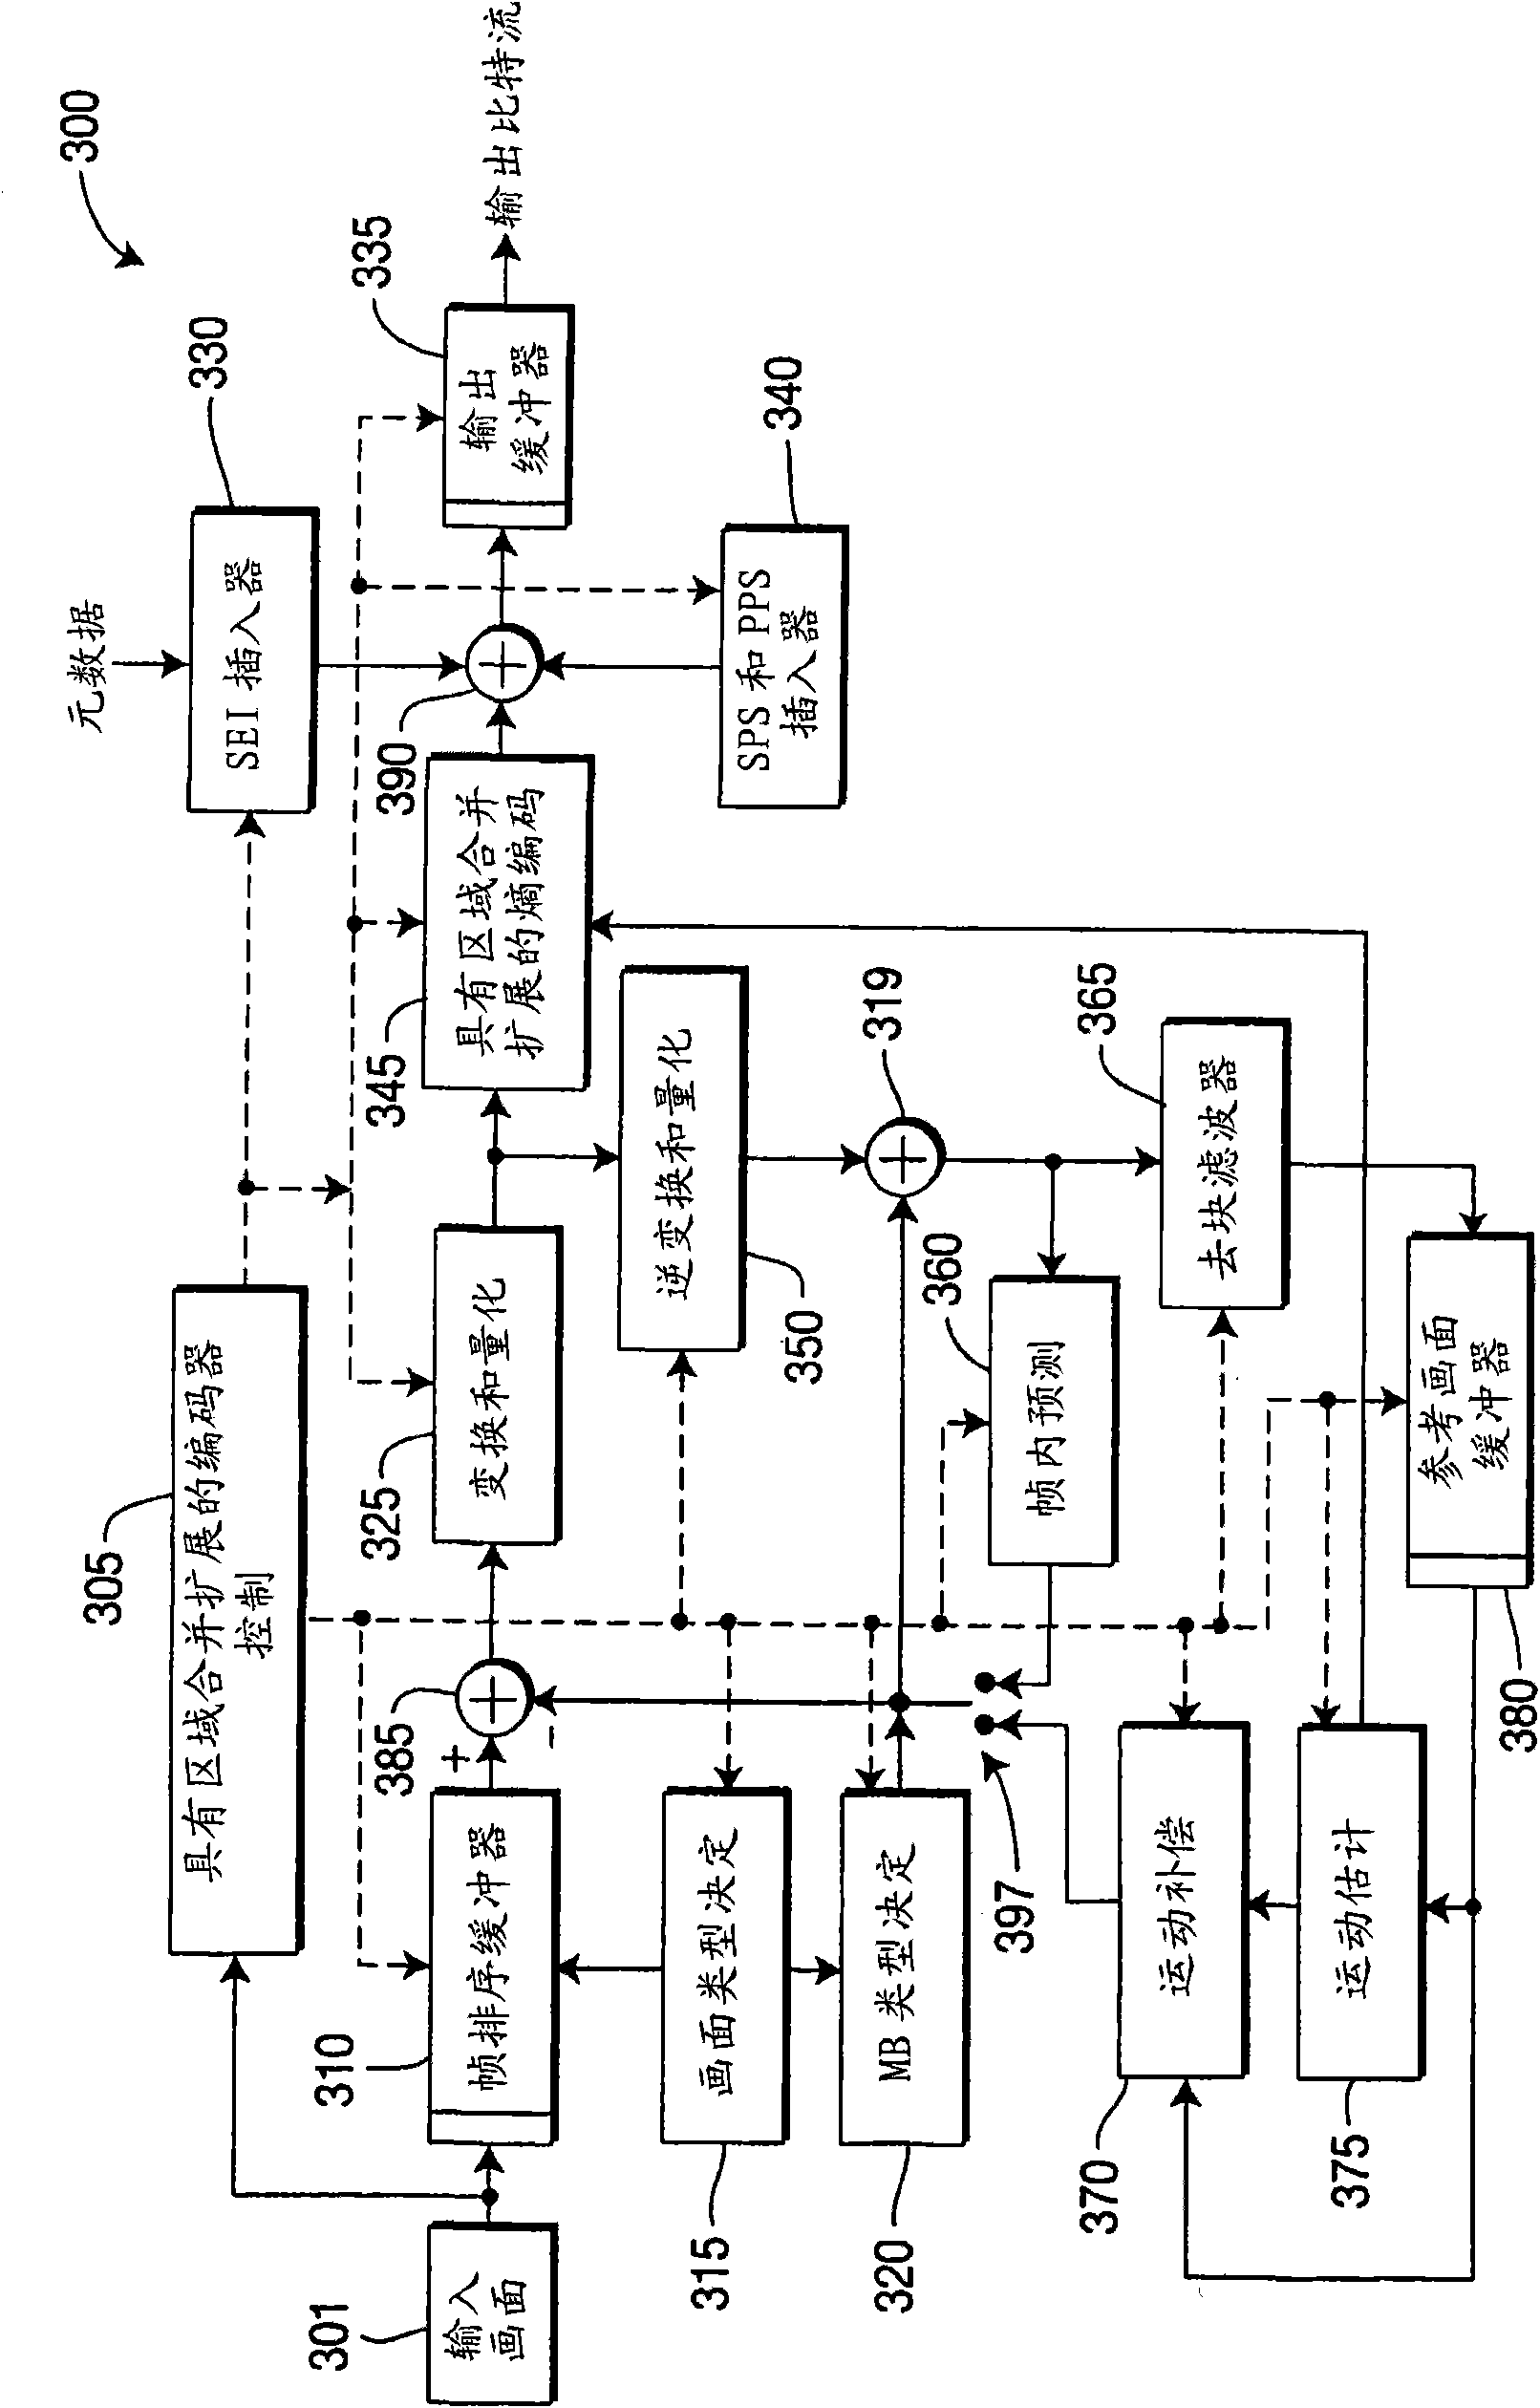 Method and apparatus for context dependent merging for skip-direct modes for video encoding and decoding